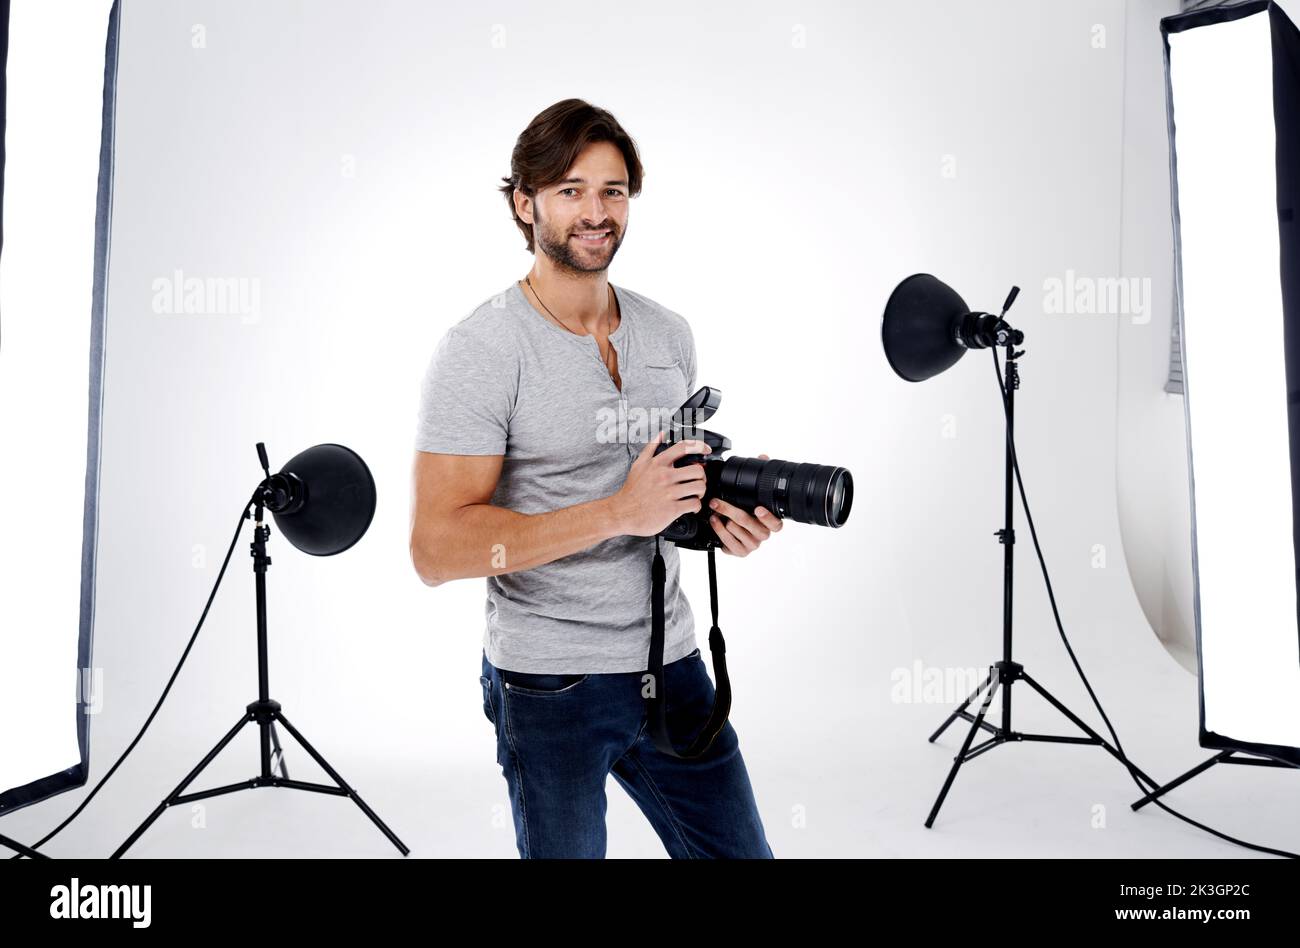 Read..,Aim...Shoot. A professional photographer in his studio. Stock Photo